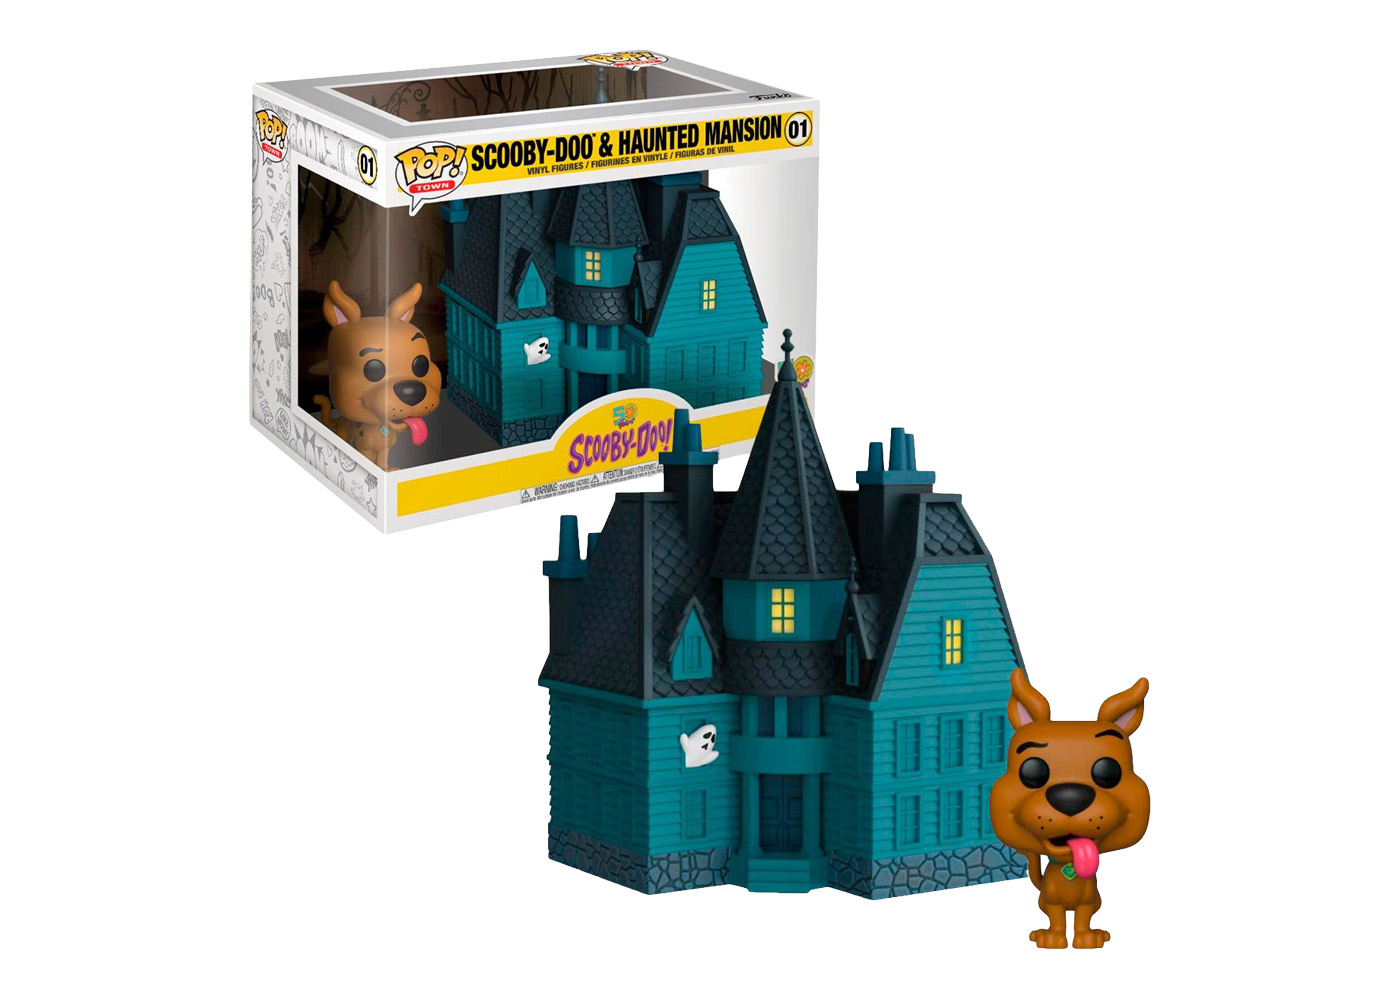 Funko Pop! Town Scooby Doo Haunted Mansion Figure #01 - GB